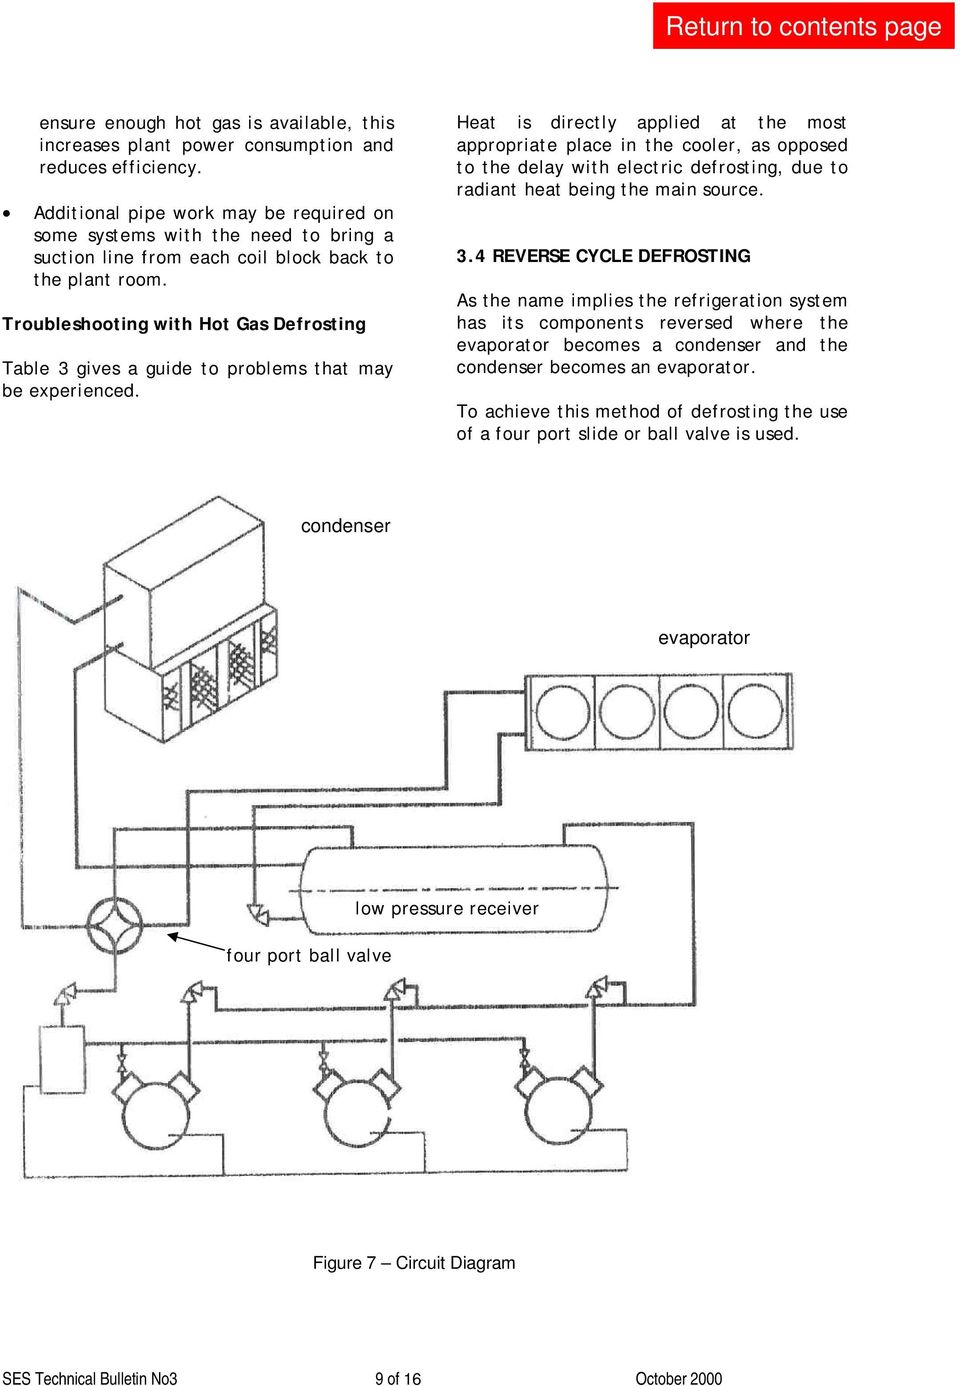 Troubleshooting with Hot Gas Defrosting Table 3 gives a guide to problems that may be experienced.